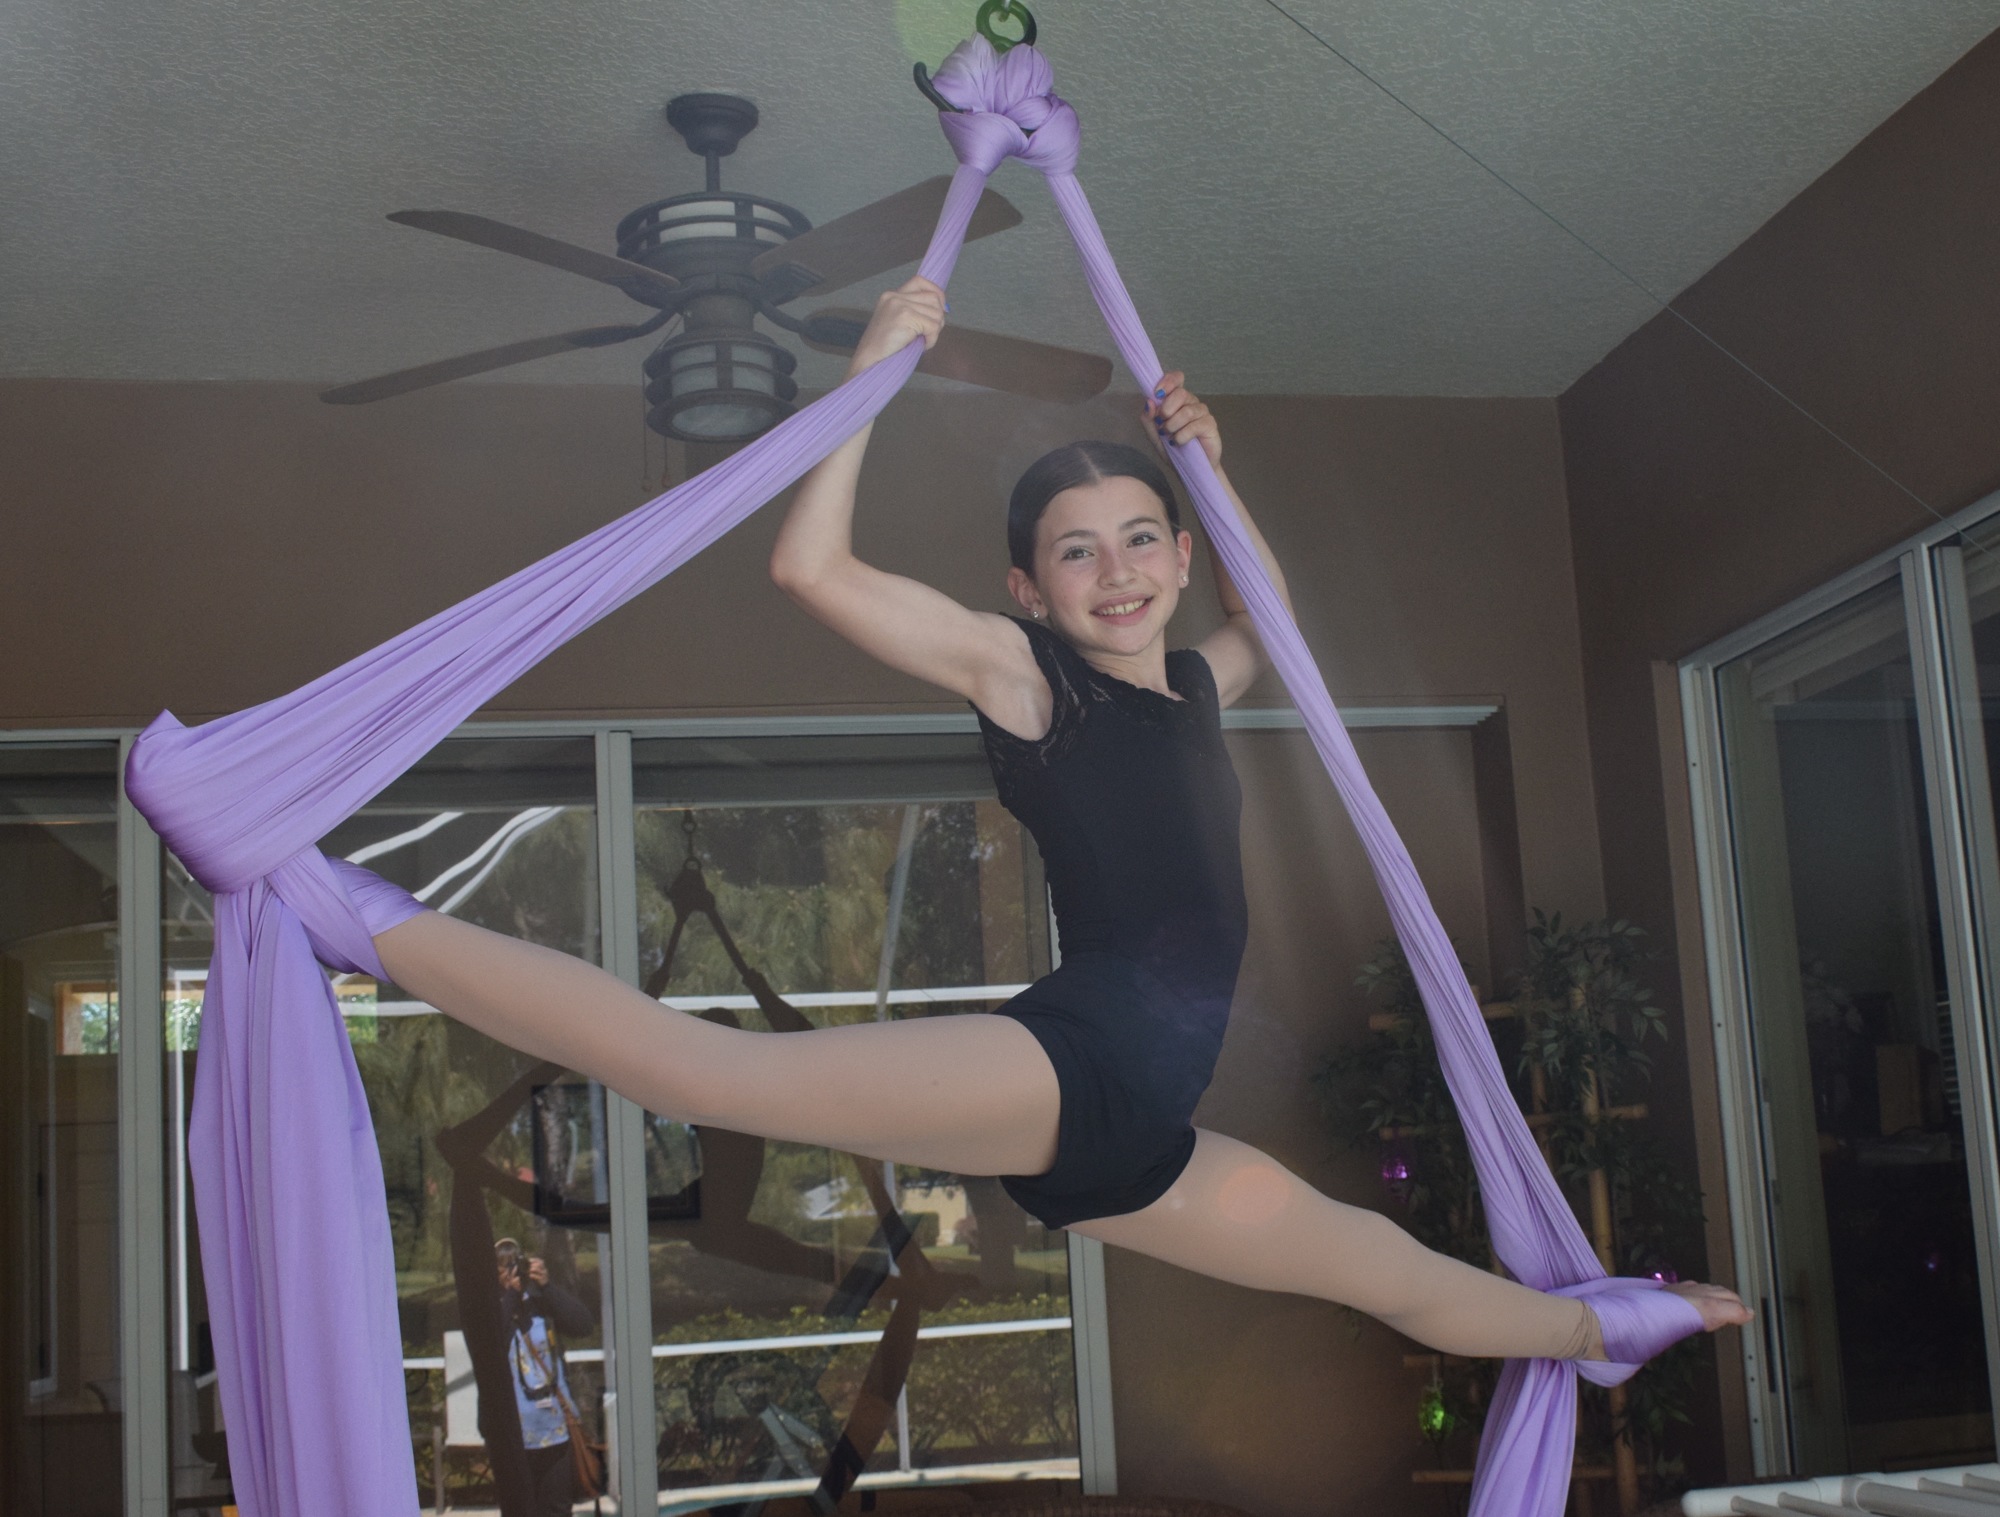 While staying at home due to COVID-19 concerns, Isabella Juliano has started using aerial silks. She hopes to learn how to dance with them.